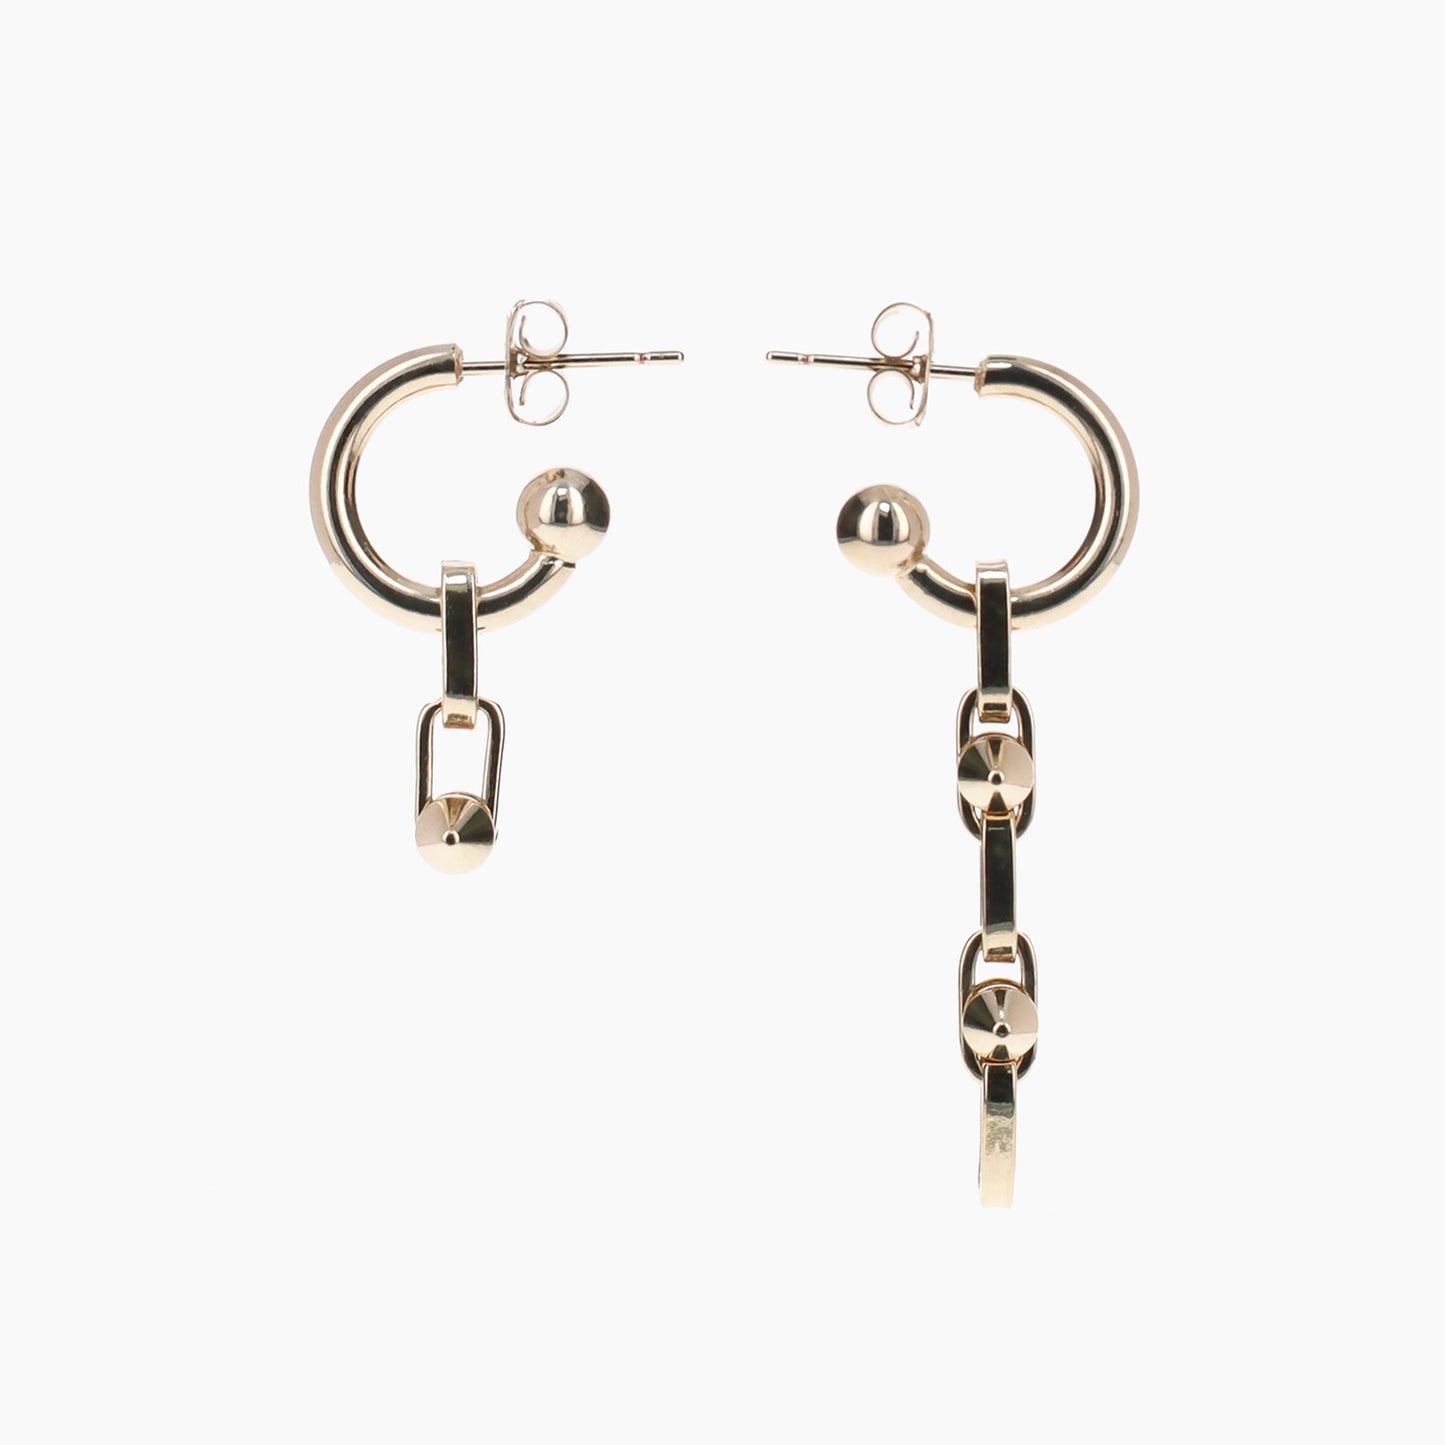 Justine Clenquet Nomi Earrings, Pale Gold